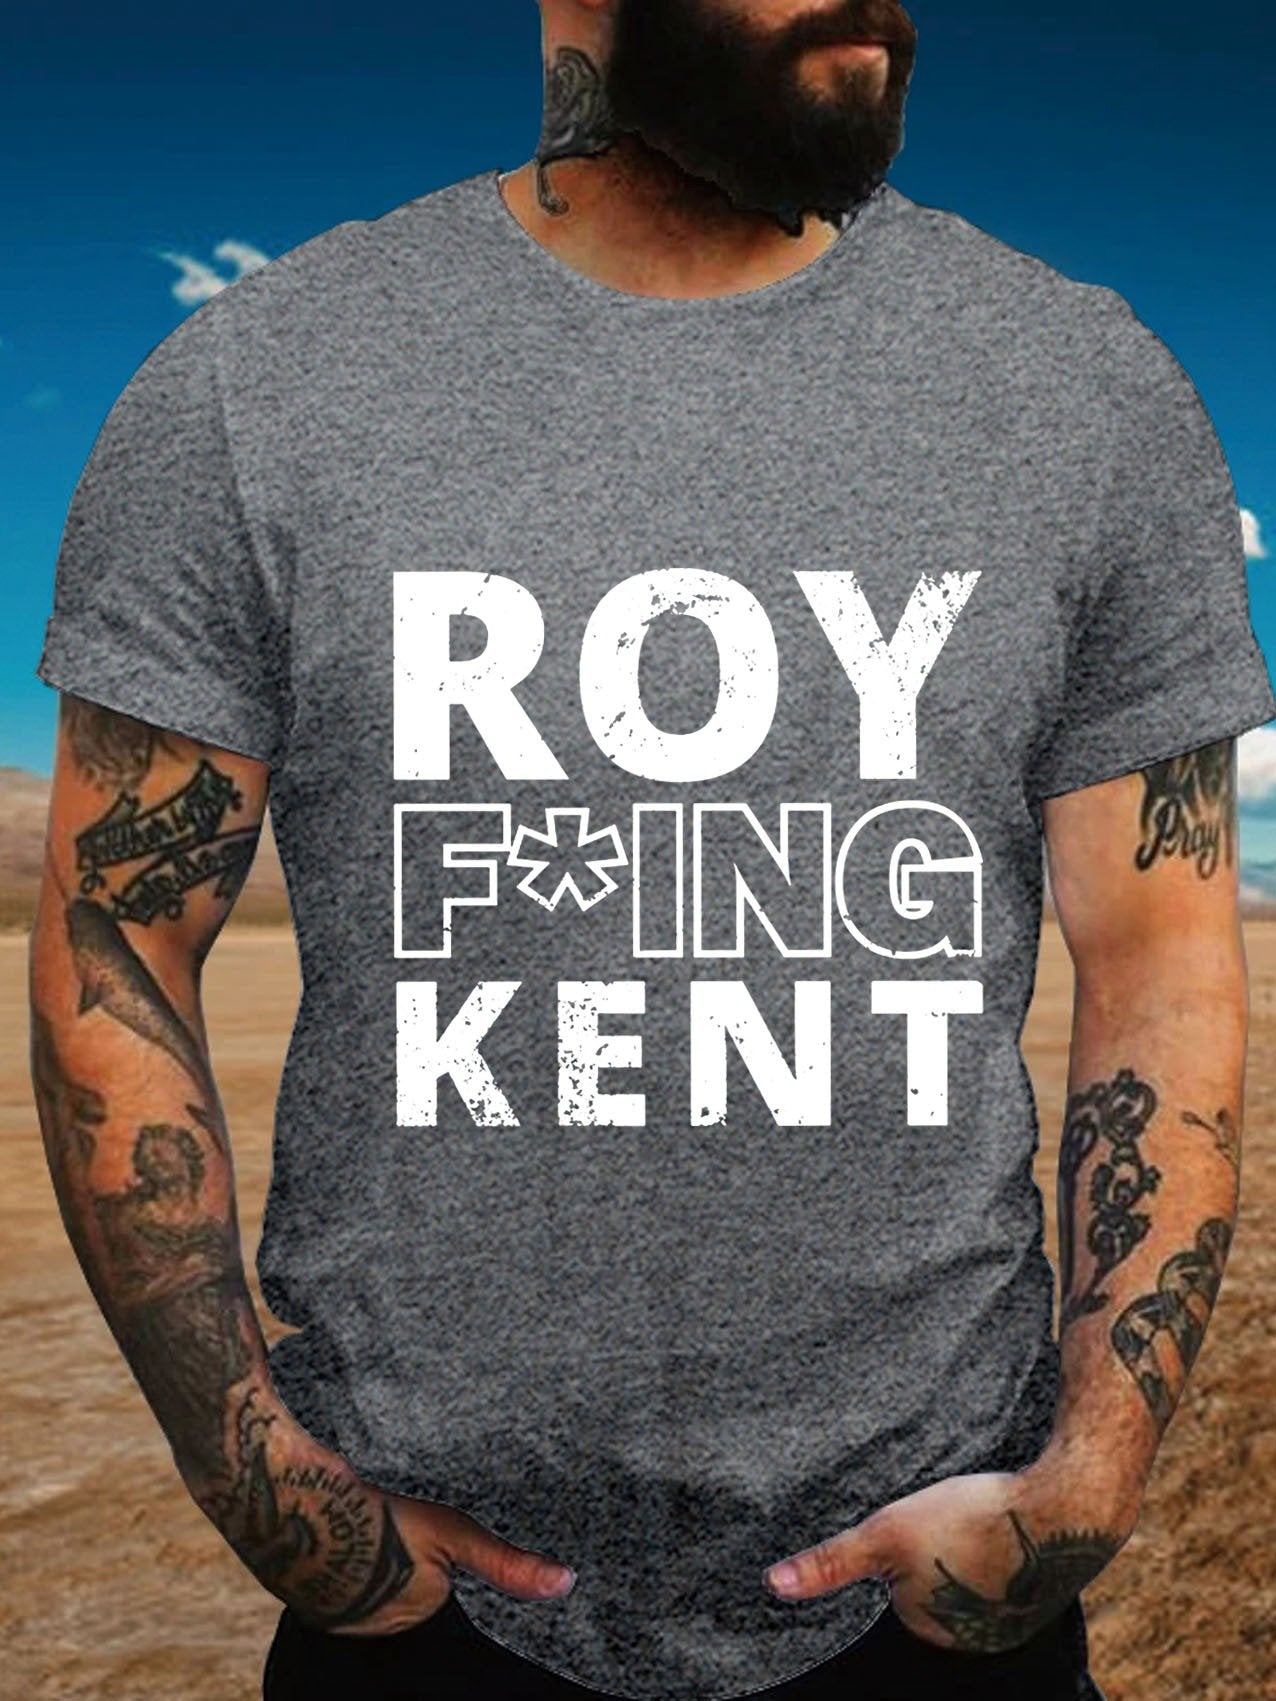 Man Roy Freaking Kent T-Shirt - Outlets Forever